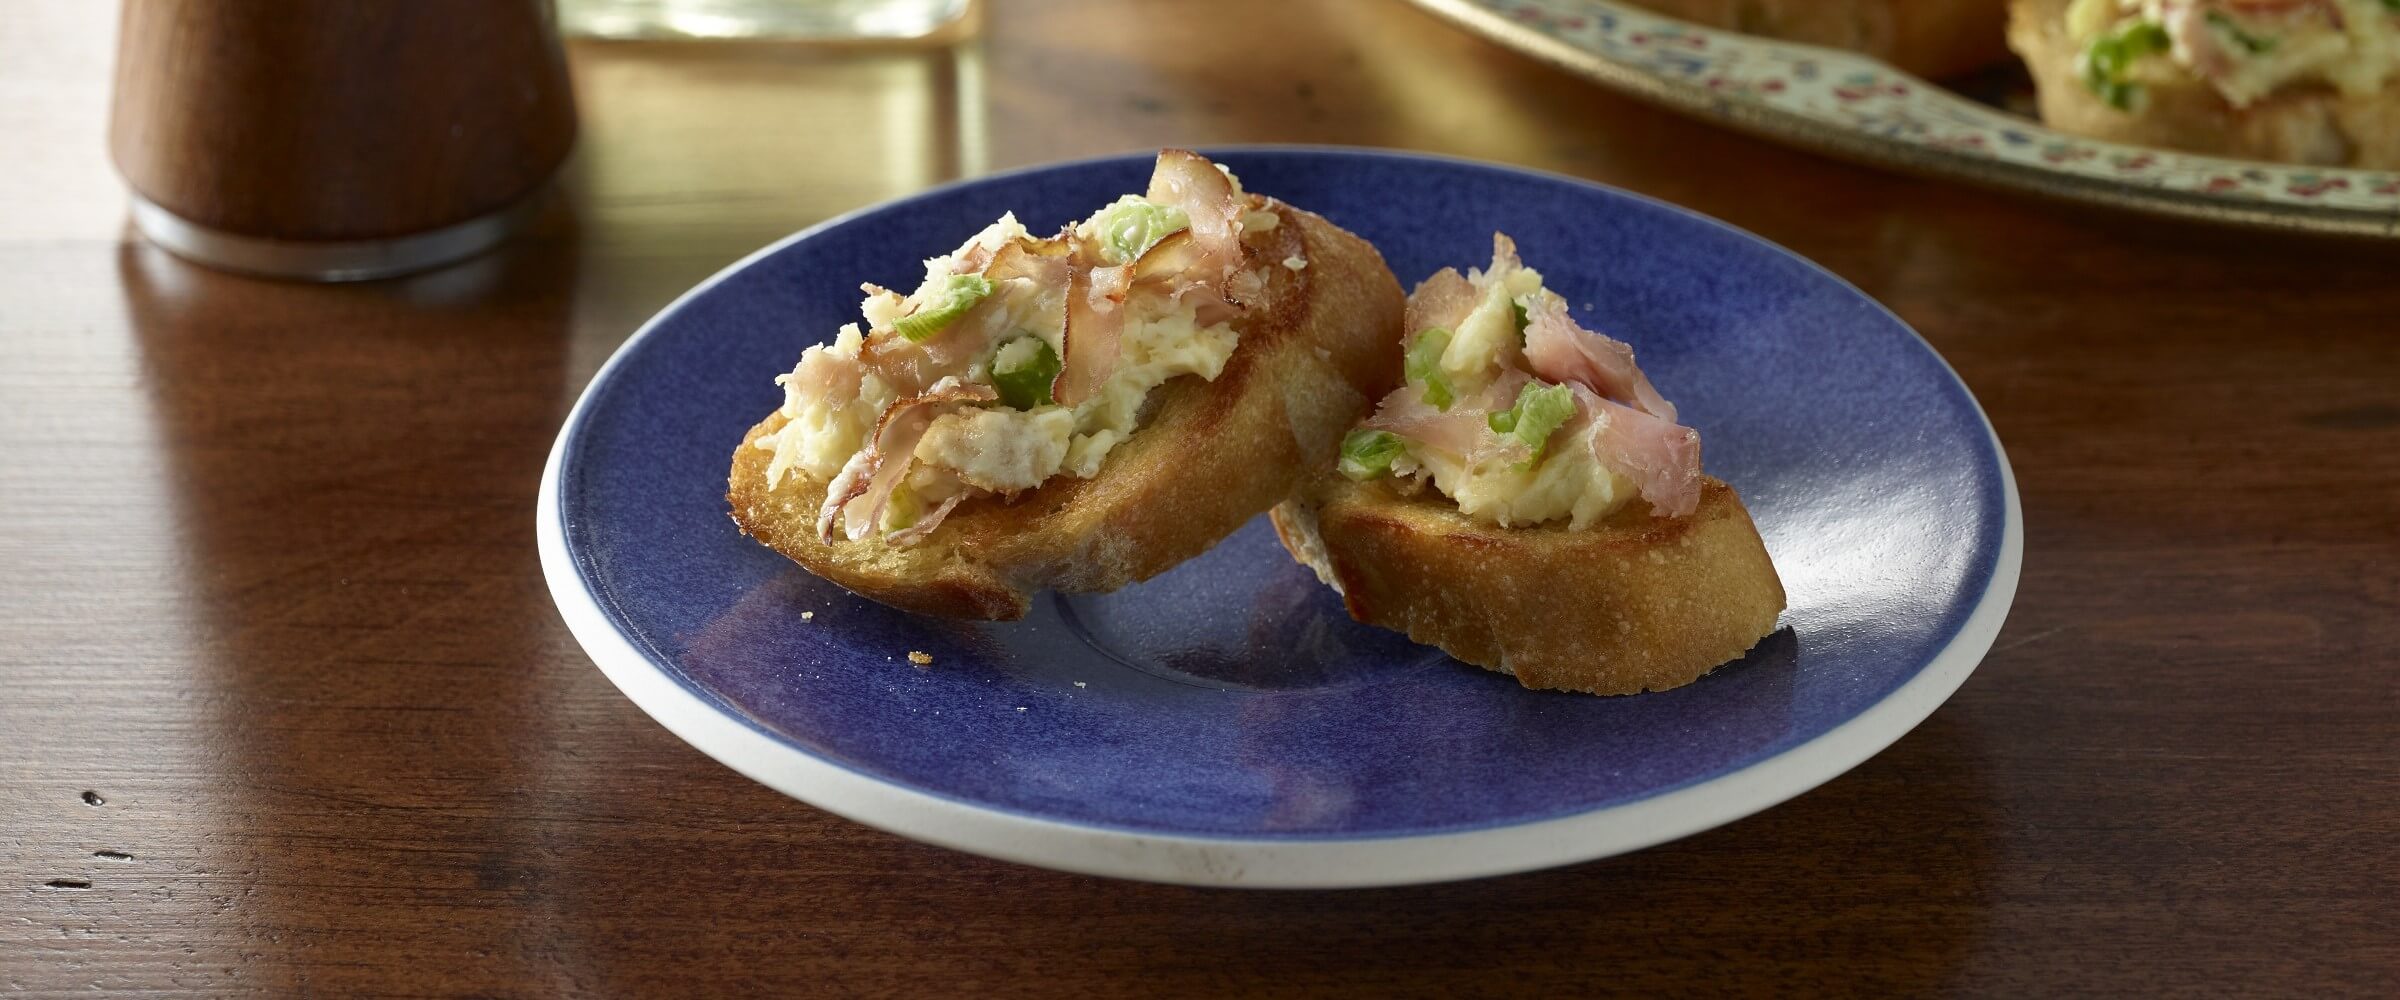 ham and parmesan appetizer on crostini on blue plate